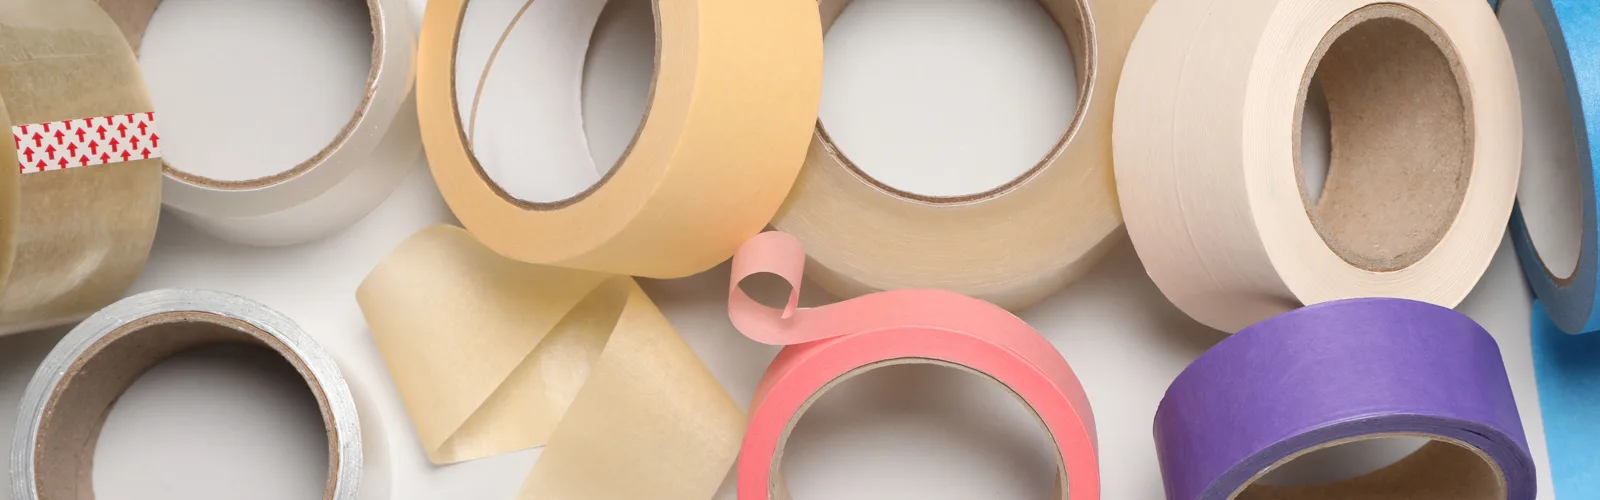 3M 16 Crepe Paper Tape, Electrical Insulation Tapes